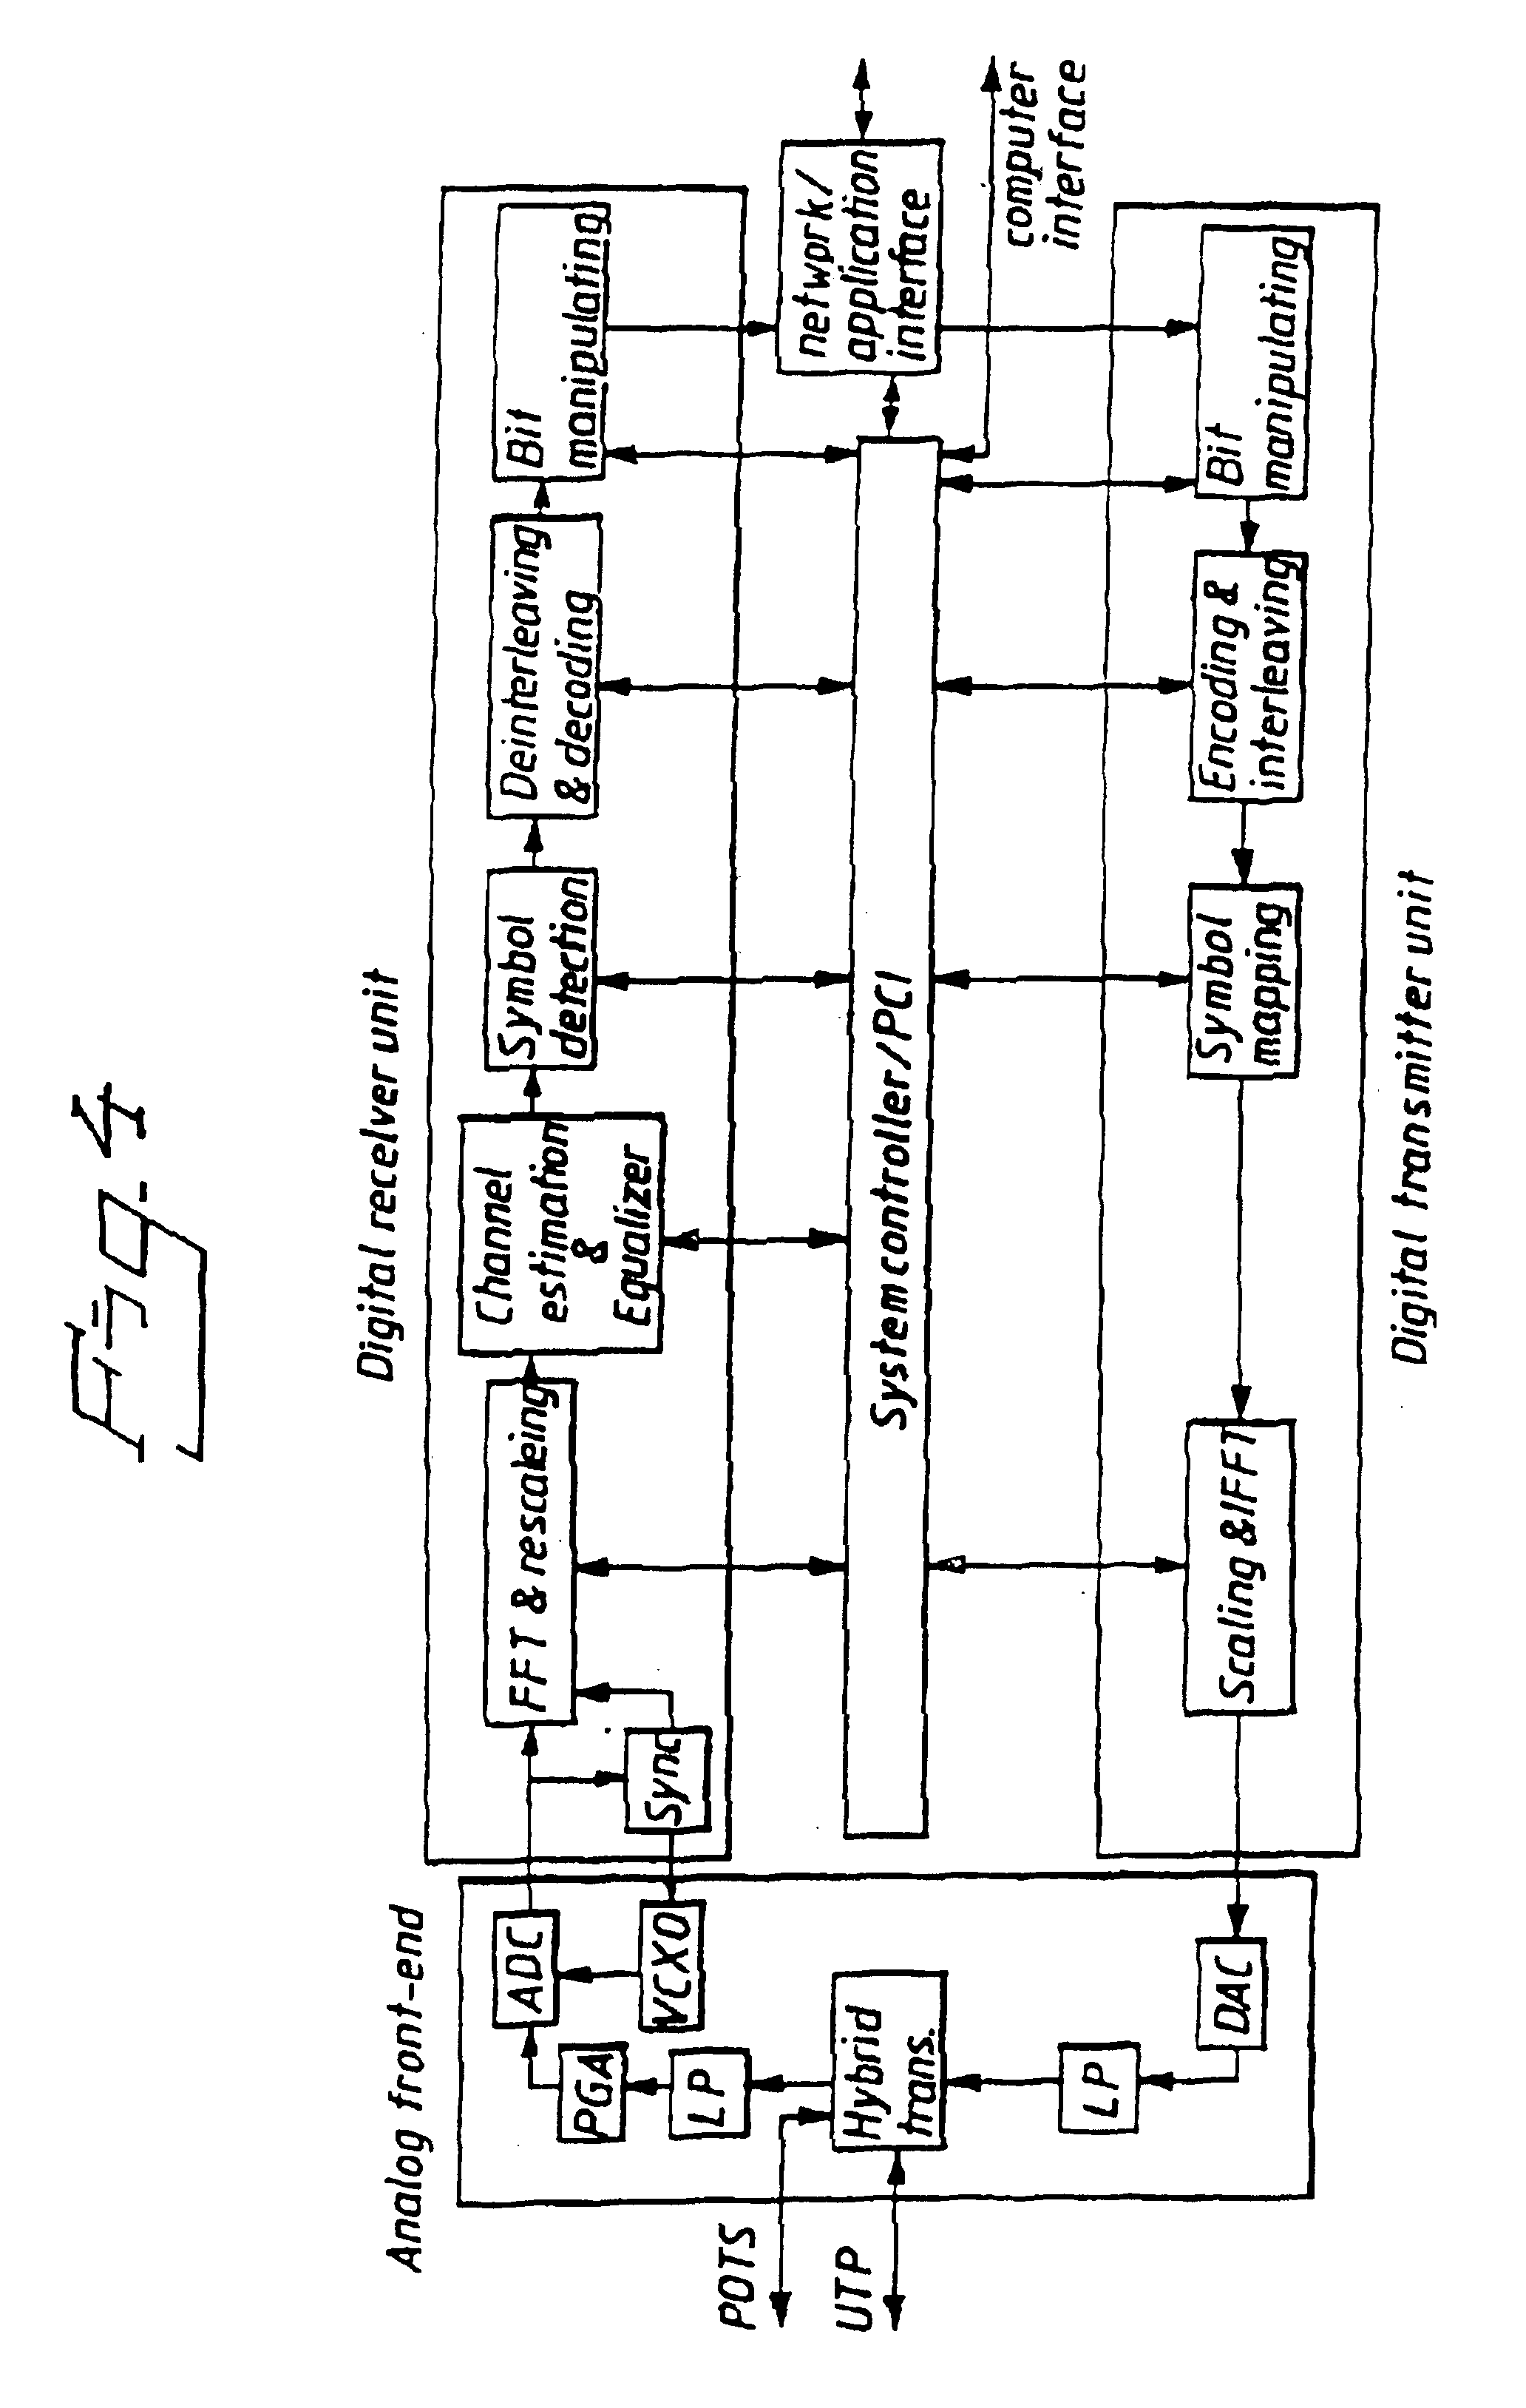 Multi-carrier transmission systems